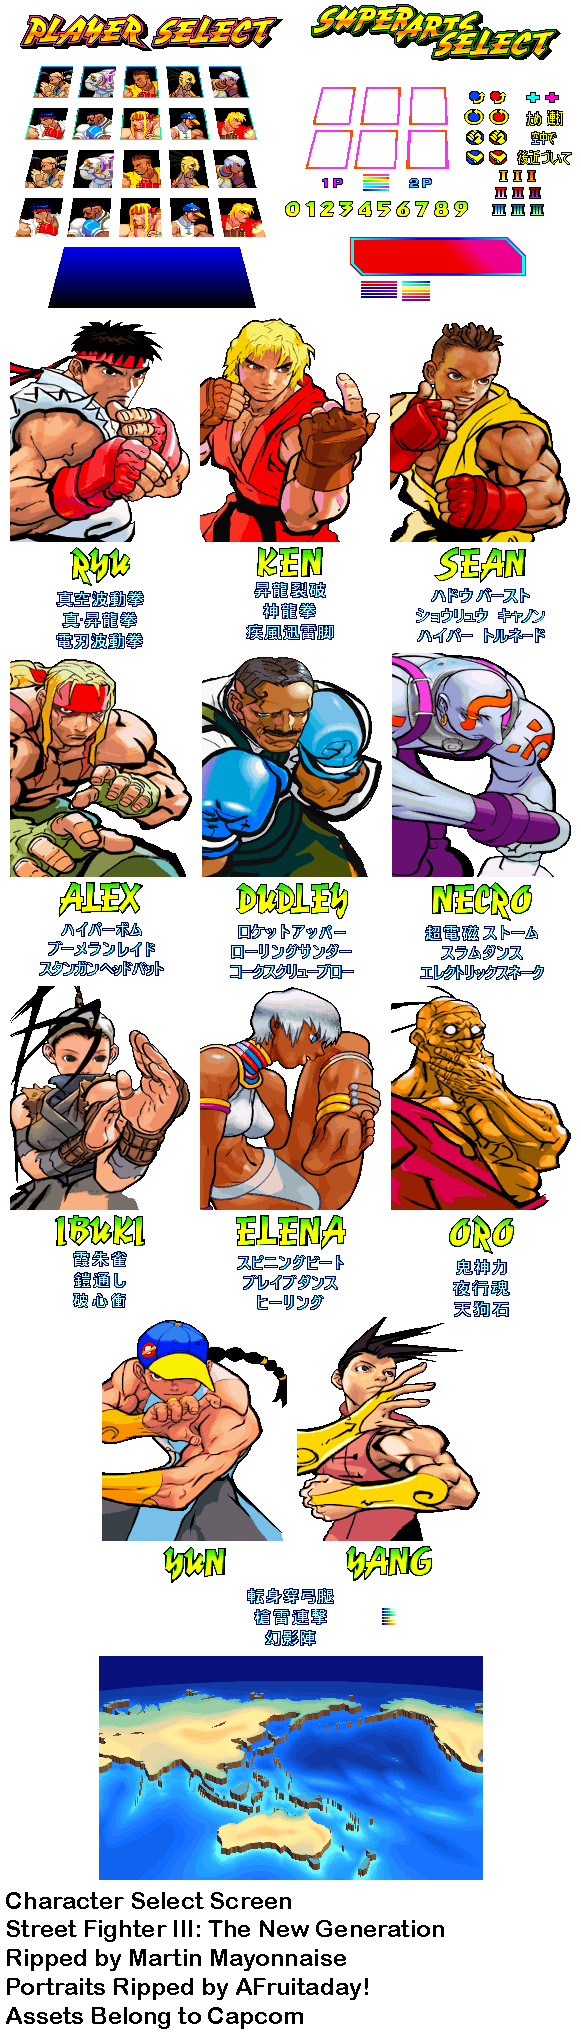 Street Fighter III: New Generation - Character Select